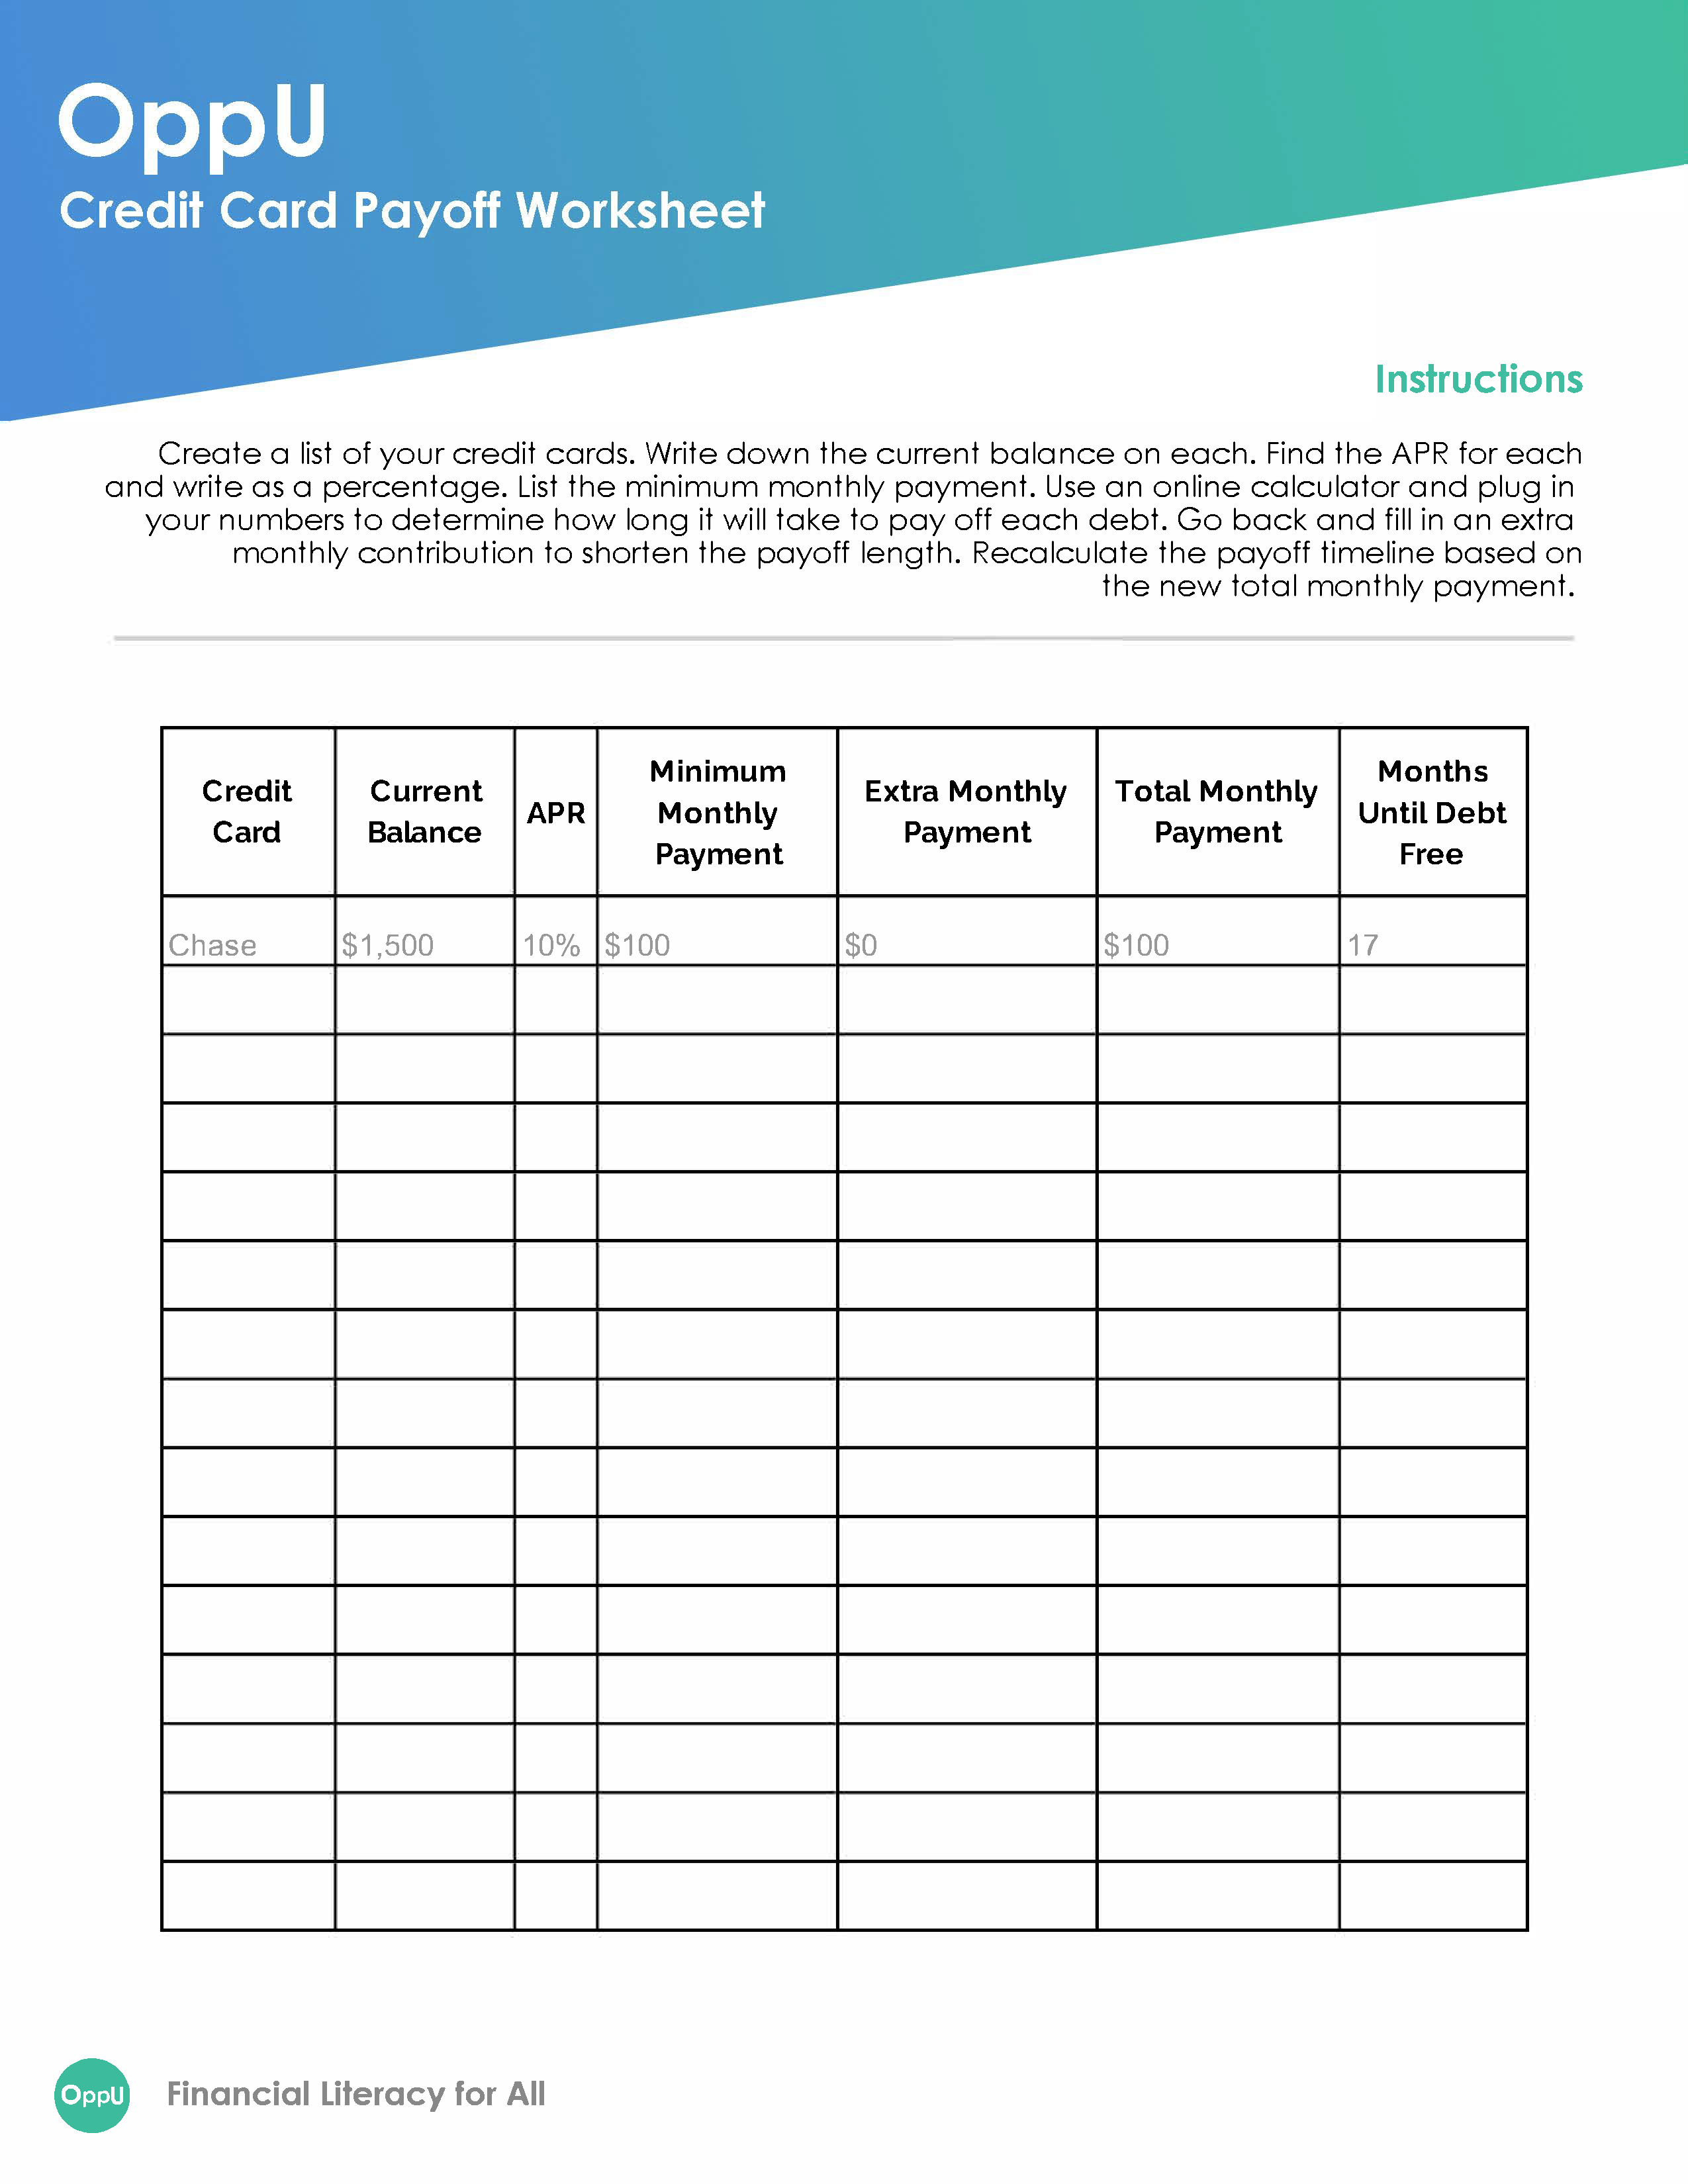 TheLending Credit Card Payoff Worksheet